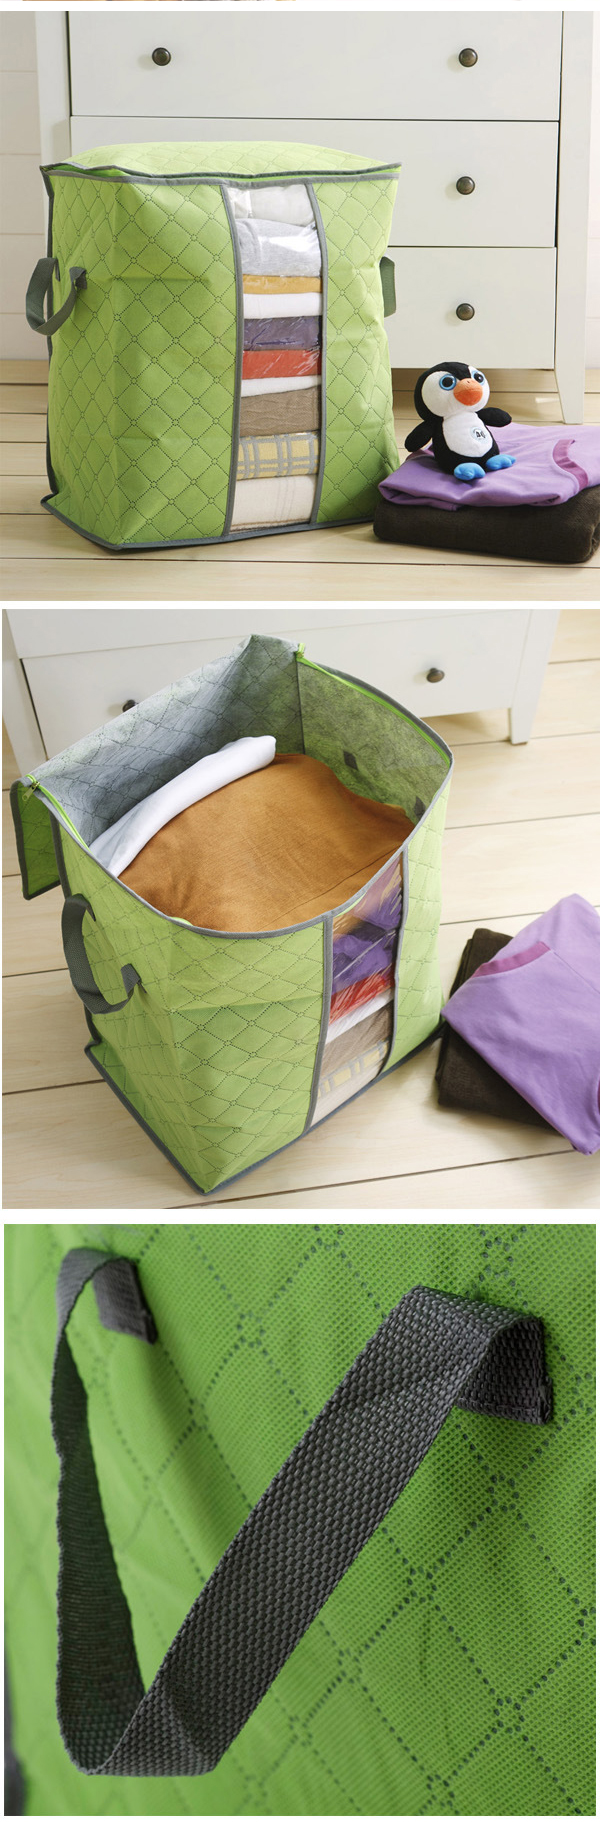 High-Capacity-Clothes-Quilts-Storage-Bags-Folding-Organizer-Bags-Bamboo-Portable-Storage-Container-946529